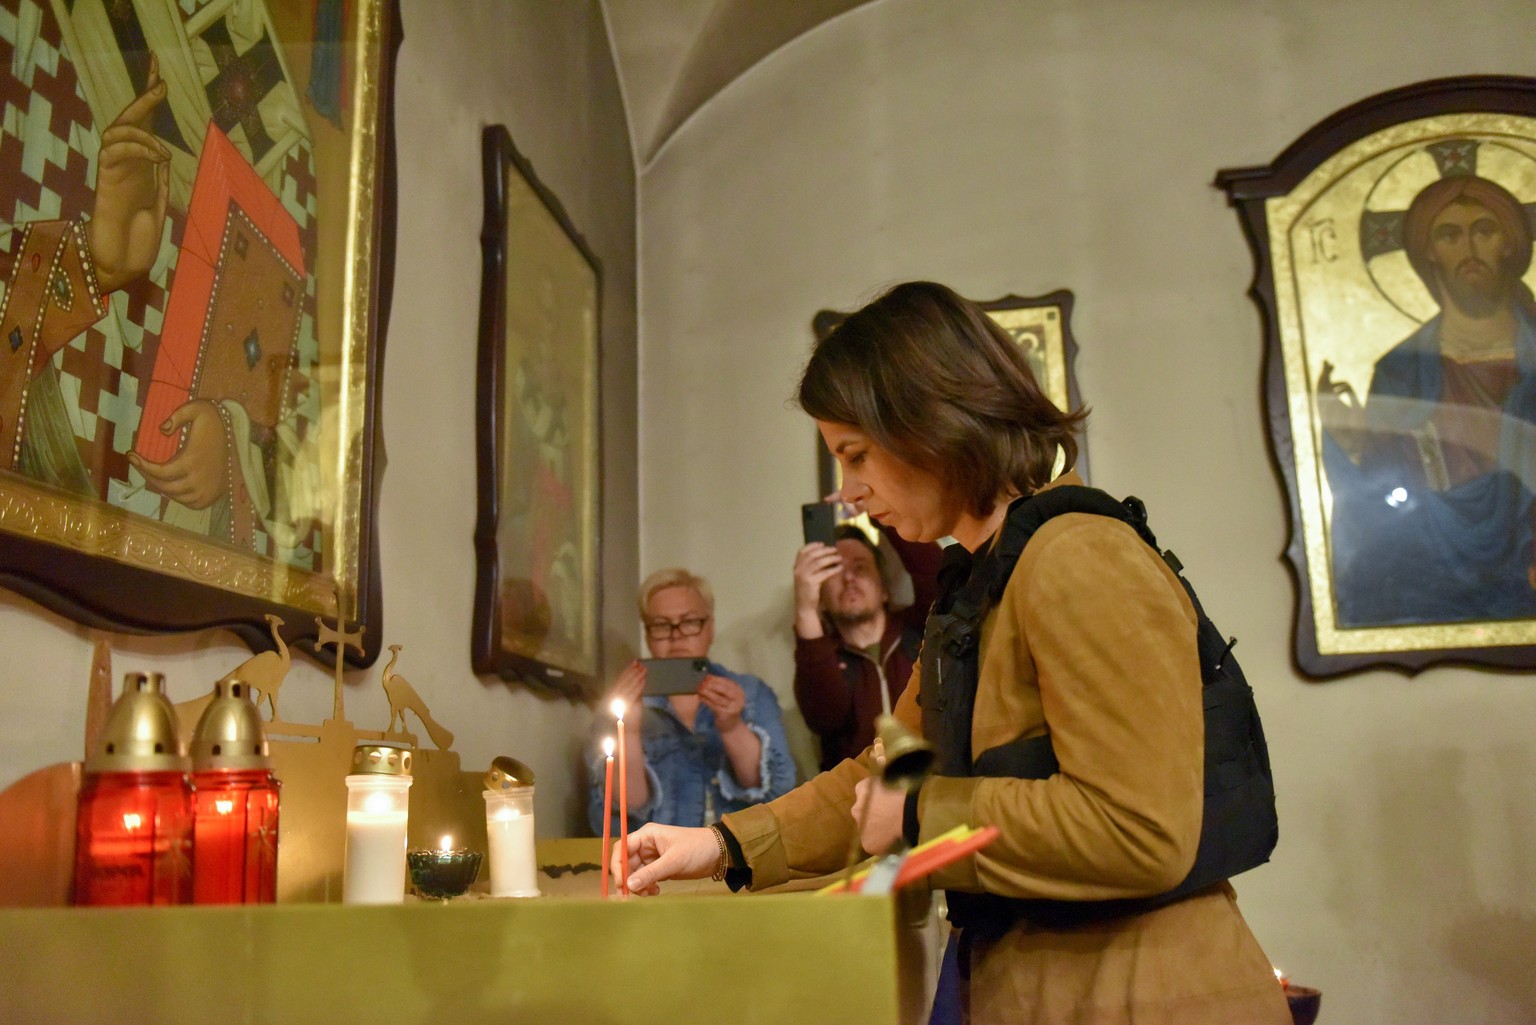 Annalena Baerbock lights a candle for the victims of Russian war crimes in Bucha.